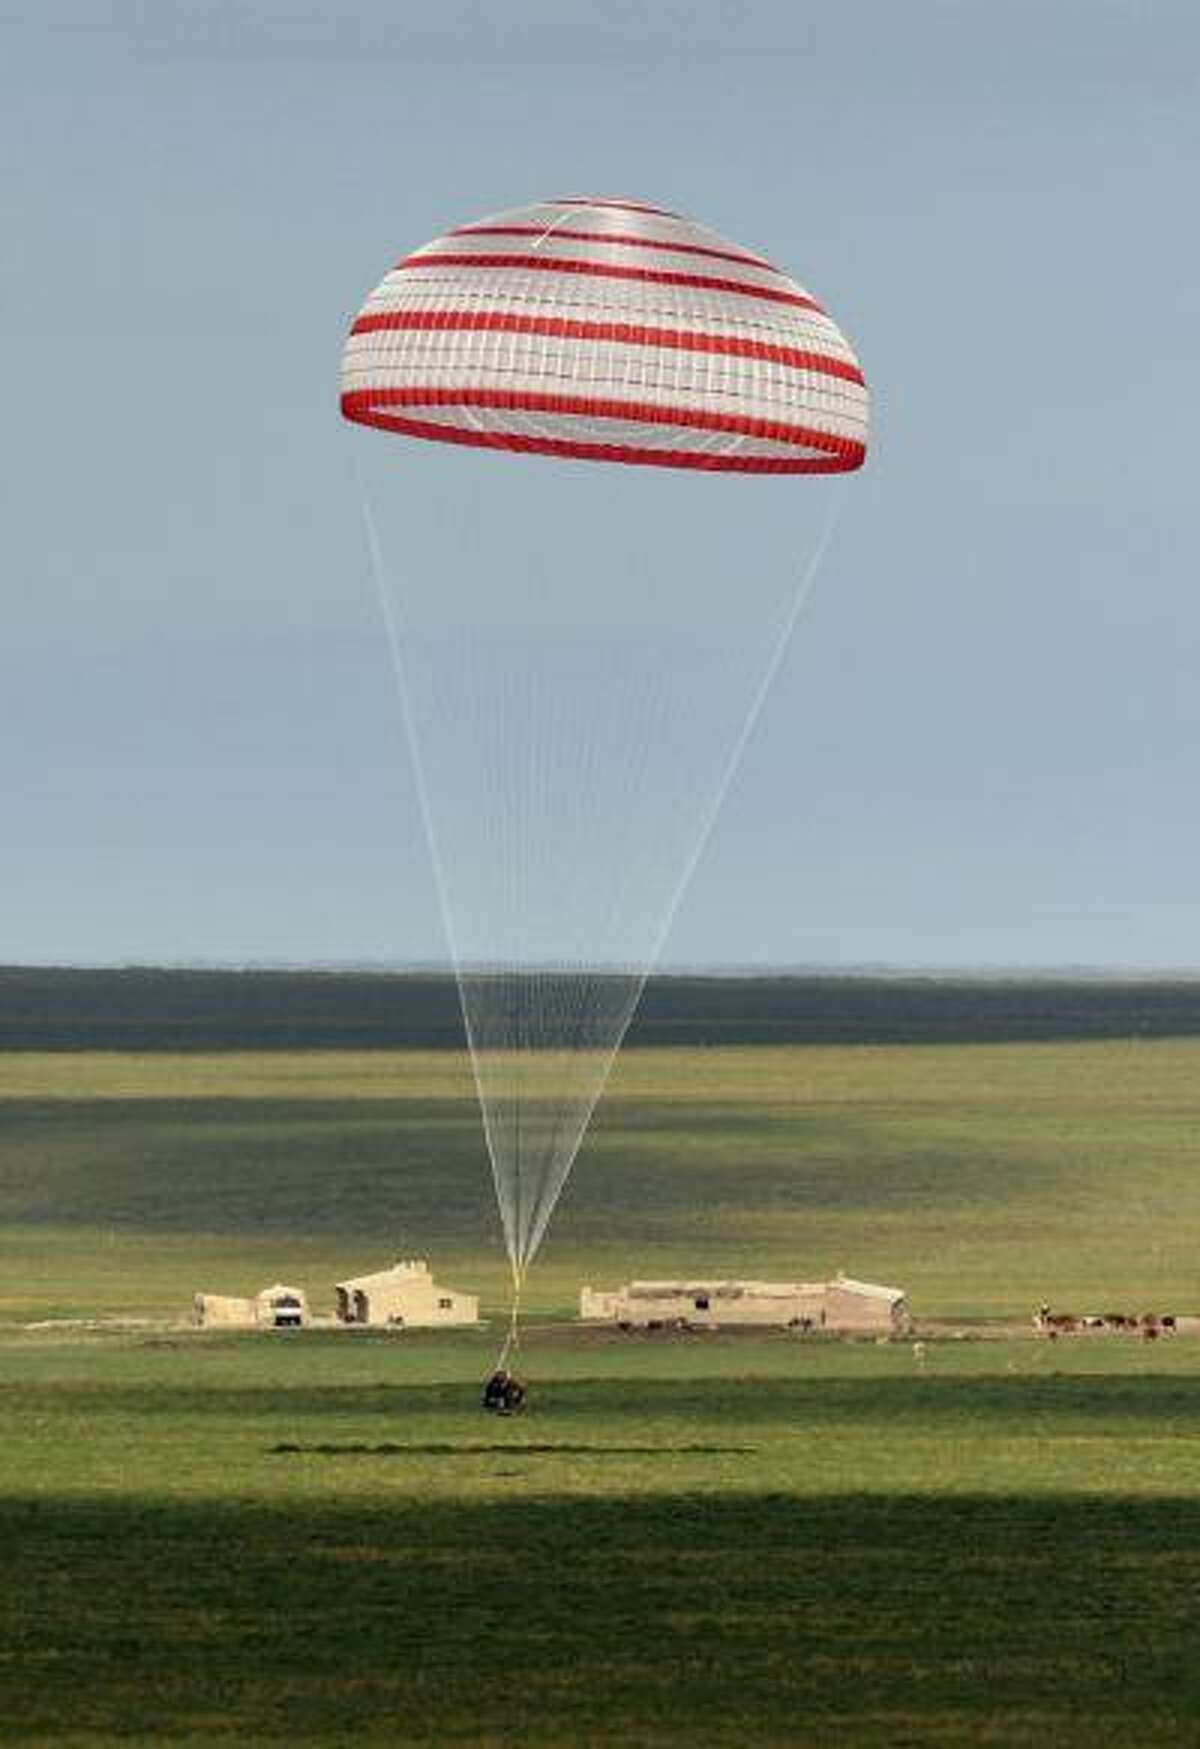 The re-entry capsule of China's Shenzhou-10 spacecraft lands at its main landing site in north China's Inner Mongolia Autonomous Region, June 26, 2013.